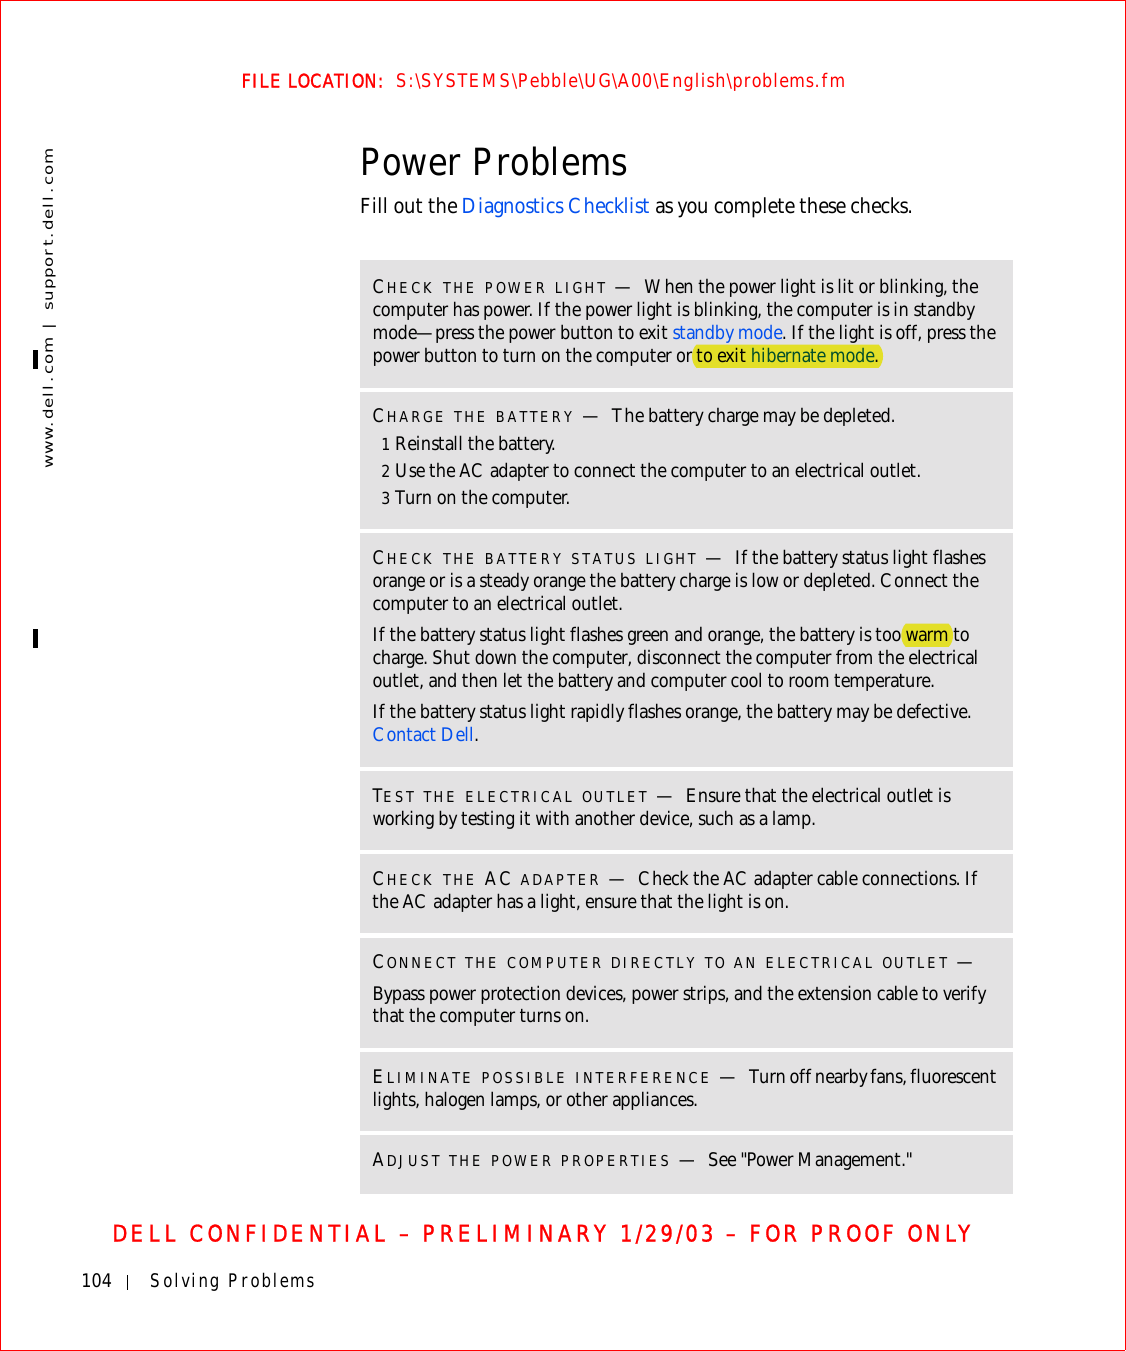 104 Solving Problemswww.dell.com | support.dell.comFILE LOCATION:  S:\SYSTEMS\Pebble\UG\A00\English\problems.fmDELL CONFIDENTIAL – PRELIMINARY 1/29/03 – FOR PROOF ONLYPower ProblemsFill out the Diagnostics Checklist as you complete these checks.CHECK THE POWER LIGHT —When the power light is lit or blinking, the computer has power. If the power light is blinking, the computer is in standby mode—press the power button to exit standby mode. If the light is off, press the power button to turn on the computer or to exit hibernate mode.CHARGE THE BATTERY —The battery charge may be depleted.1Reinstall the battery.2Use the AC adapter to connect the computer to an electrical outlet.3Turn on the computer.CHECK THE BATTERY STATUS LIGHT —If the battery status light flashes orange or is a steady orange the battery charge is low or depleted. Connect the computer to an electrical outlet.If the battery status light flashes green and orange, the battery is too warm to charge. Shut down the computer, disconnect the computer from the electrical outlet, and then let the battery and computer cool to room temperature.If the battery status light rapidly flashes orange, the battery may be defective. Contact Dell.TEST THE ELECTRICAL OUTLET —Ensure that the electrical outlet is working by testing it with another device, such as a lamp.CHECK THE AC ADAPTER —Check the AC adapter cable connections. If the AC adapter has a light, ensure that the light is on.CONNECT THE COMPUTER DIRECTLY TO AN ELECTRICAL OUTLET —Bypass power protection devices, power strips, and the extension cable to verify that the computer turns on.ELIMINATE POSSIBLE INTERFERENCE —Turn off nearby fans, fluorescent lights, halogen lamps, or other appliances.ADJUST THE POWER PROPERTIES —See &quot;Power Management.&quot;